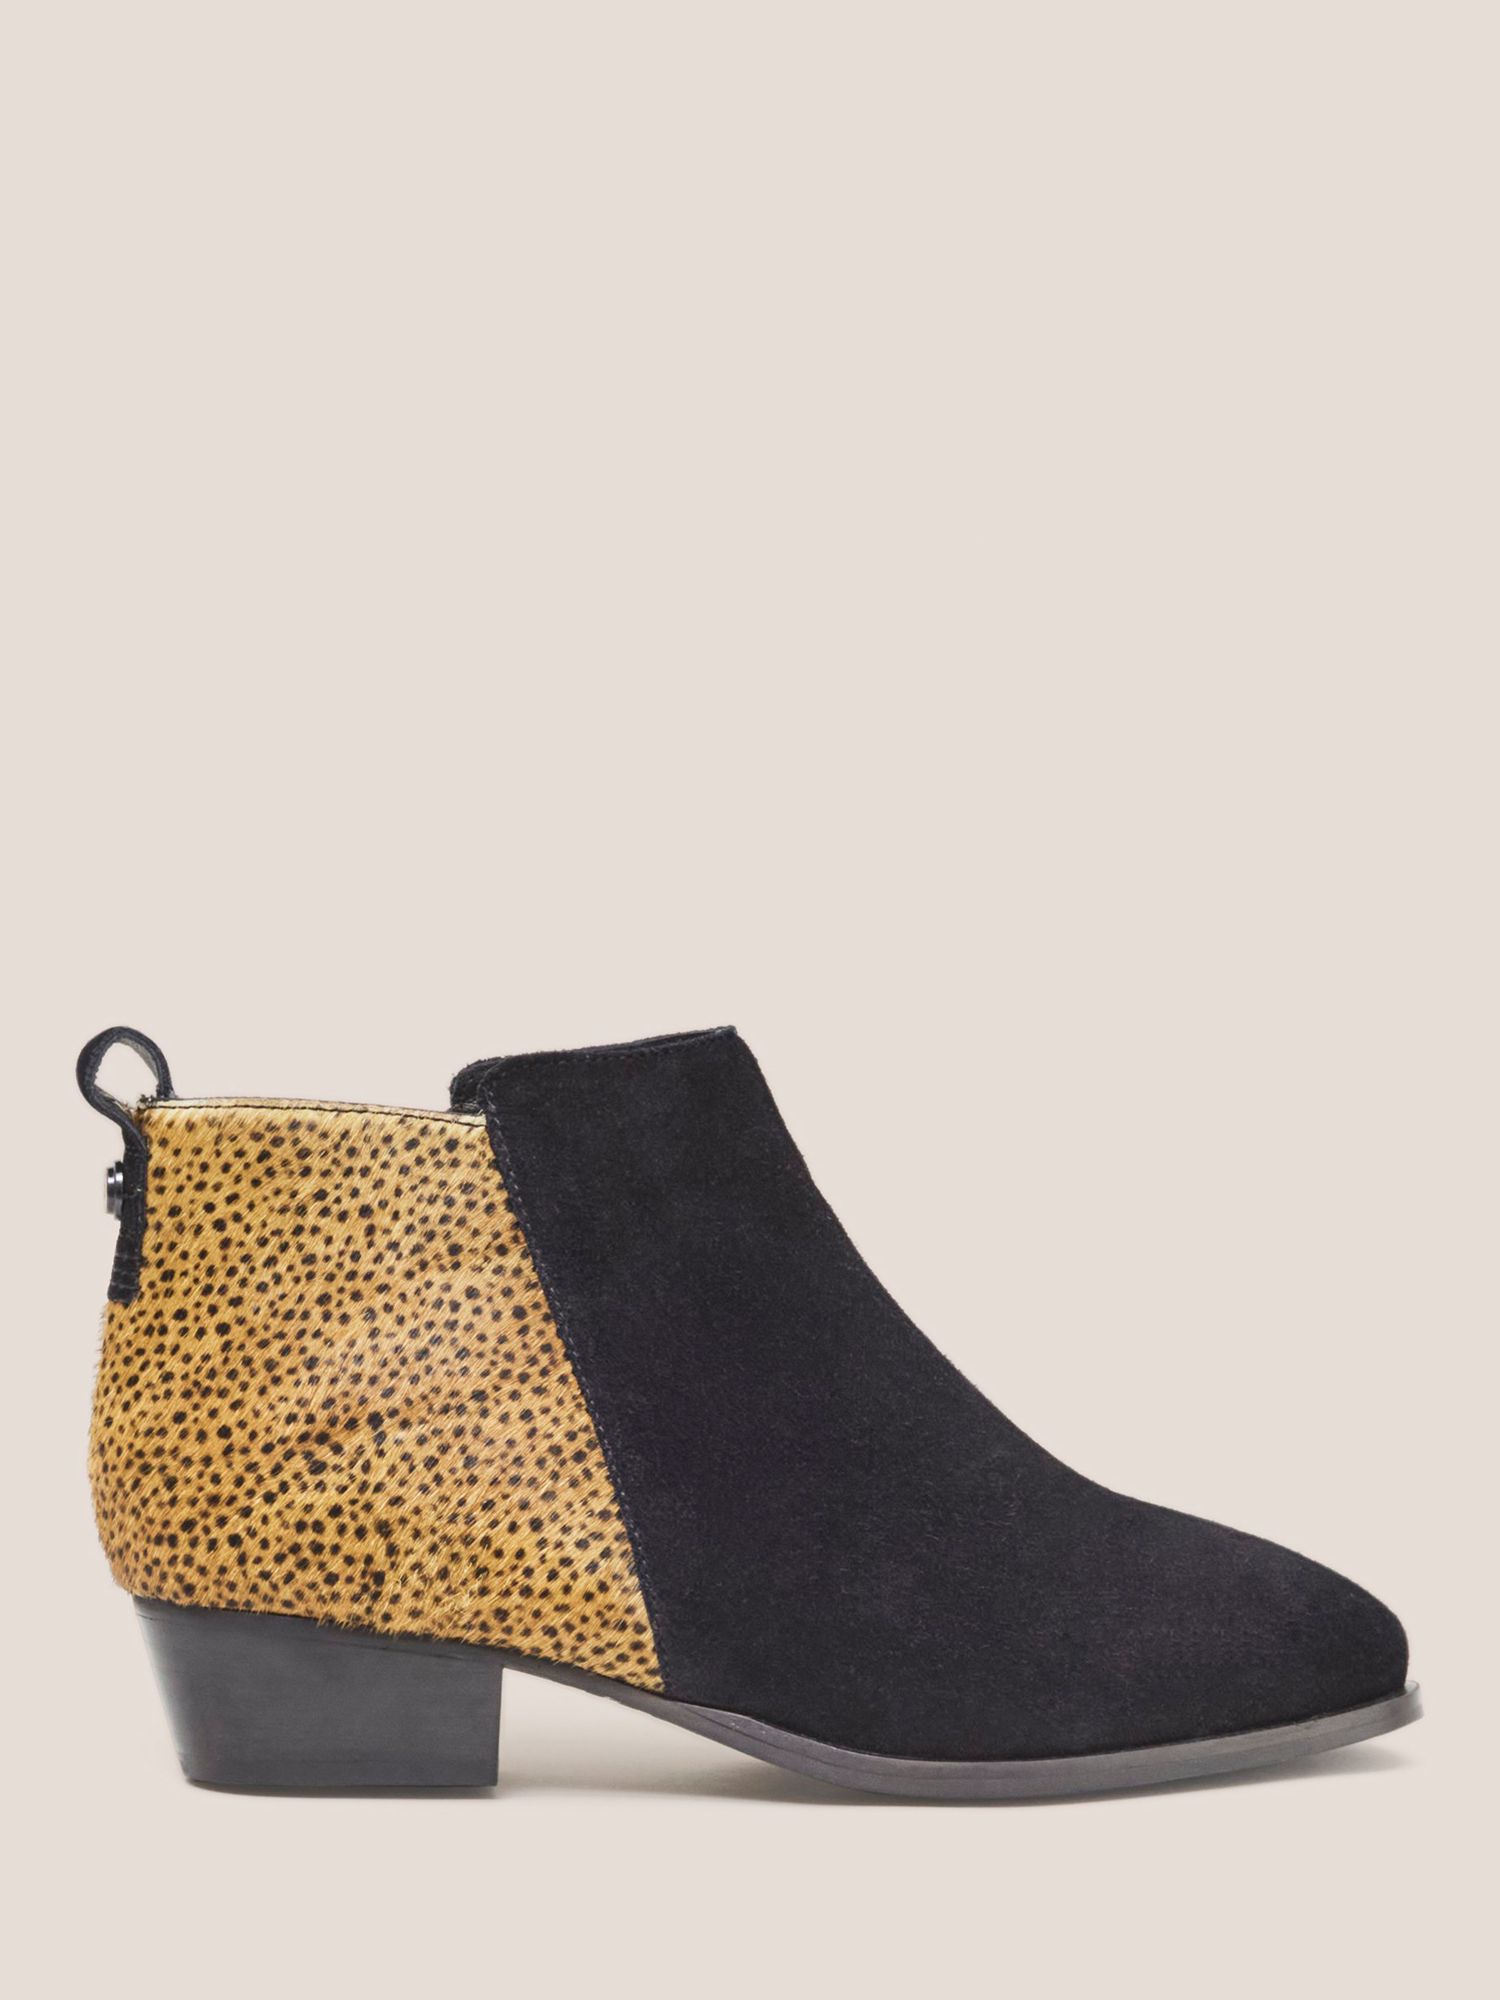 White Stuff Willow Suede Pony Ankle Boots, Black/Yellow, 8